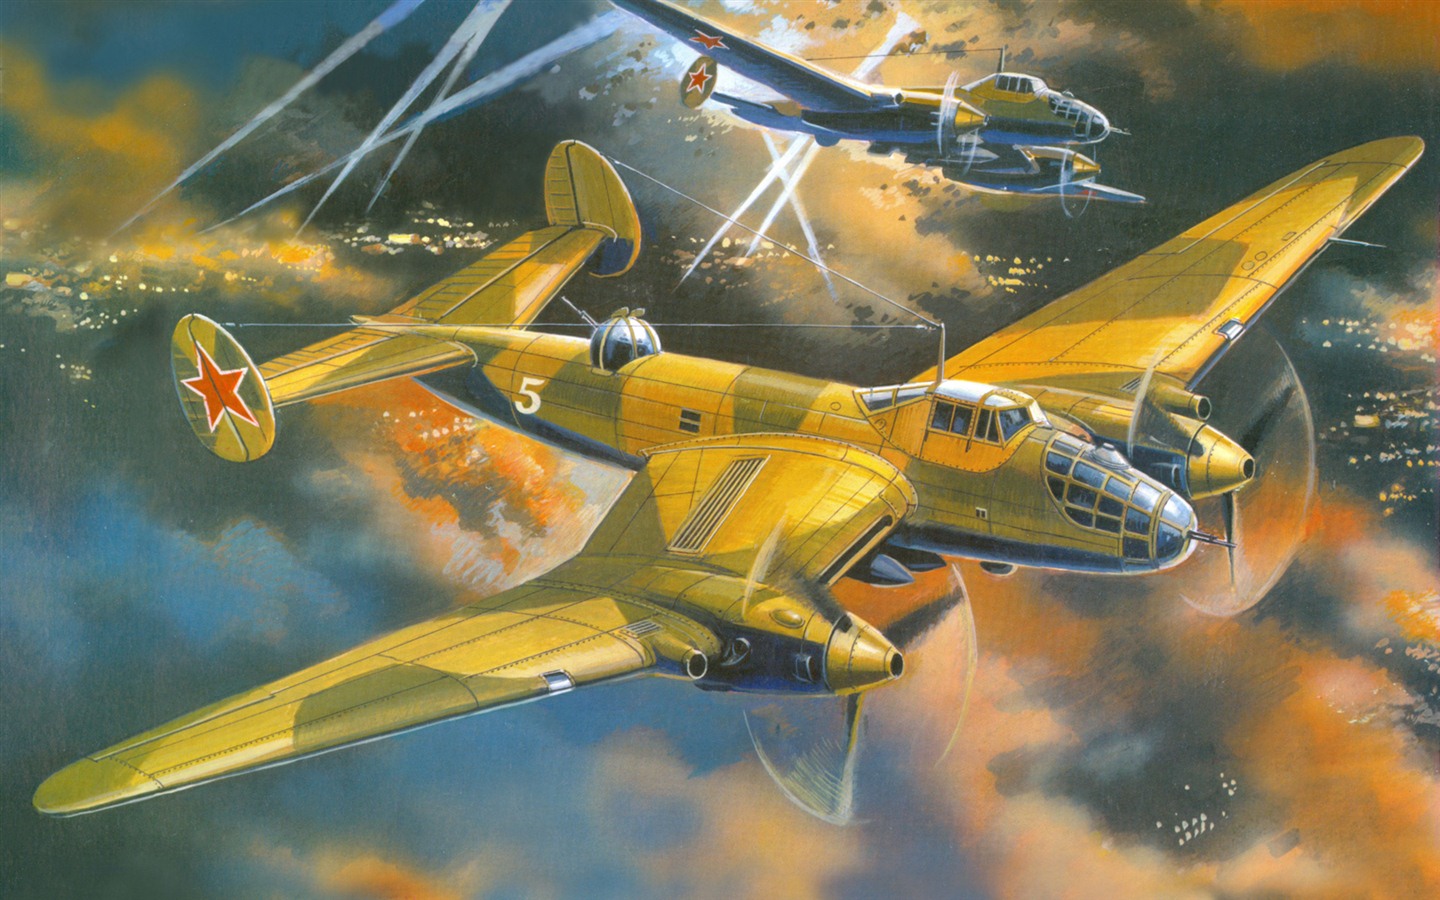 Military aircraft flight exquisite painting wallpapers #18 - 1440x900